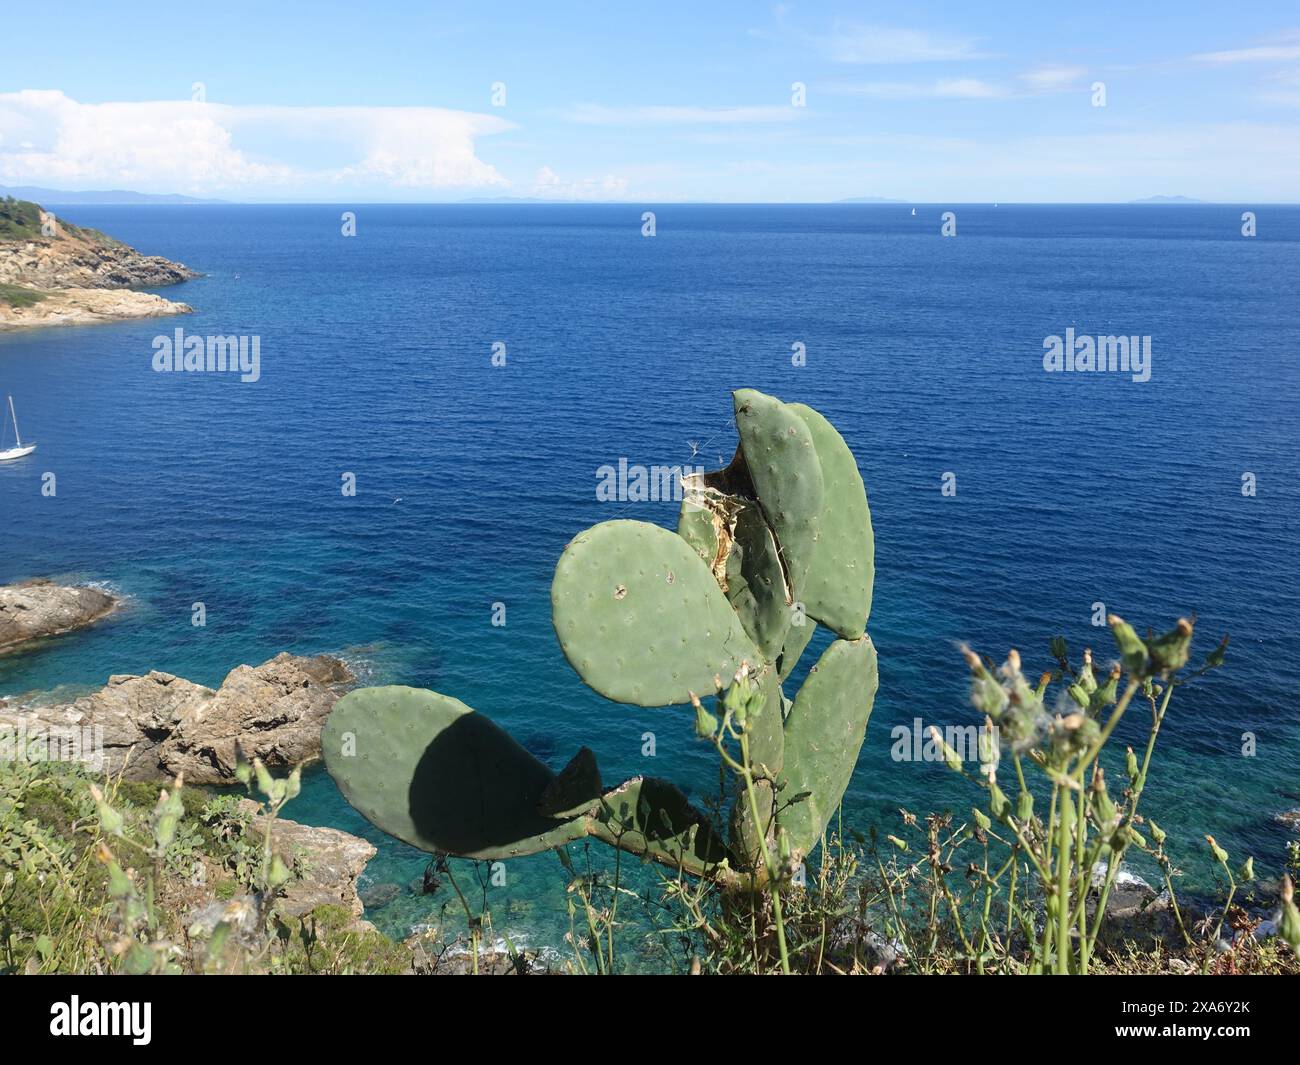 A cactus plant with a view of water, shore, sailboat, and rocks in the distance Stock Photo